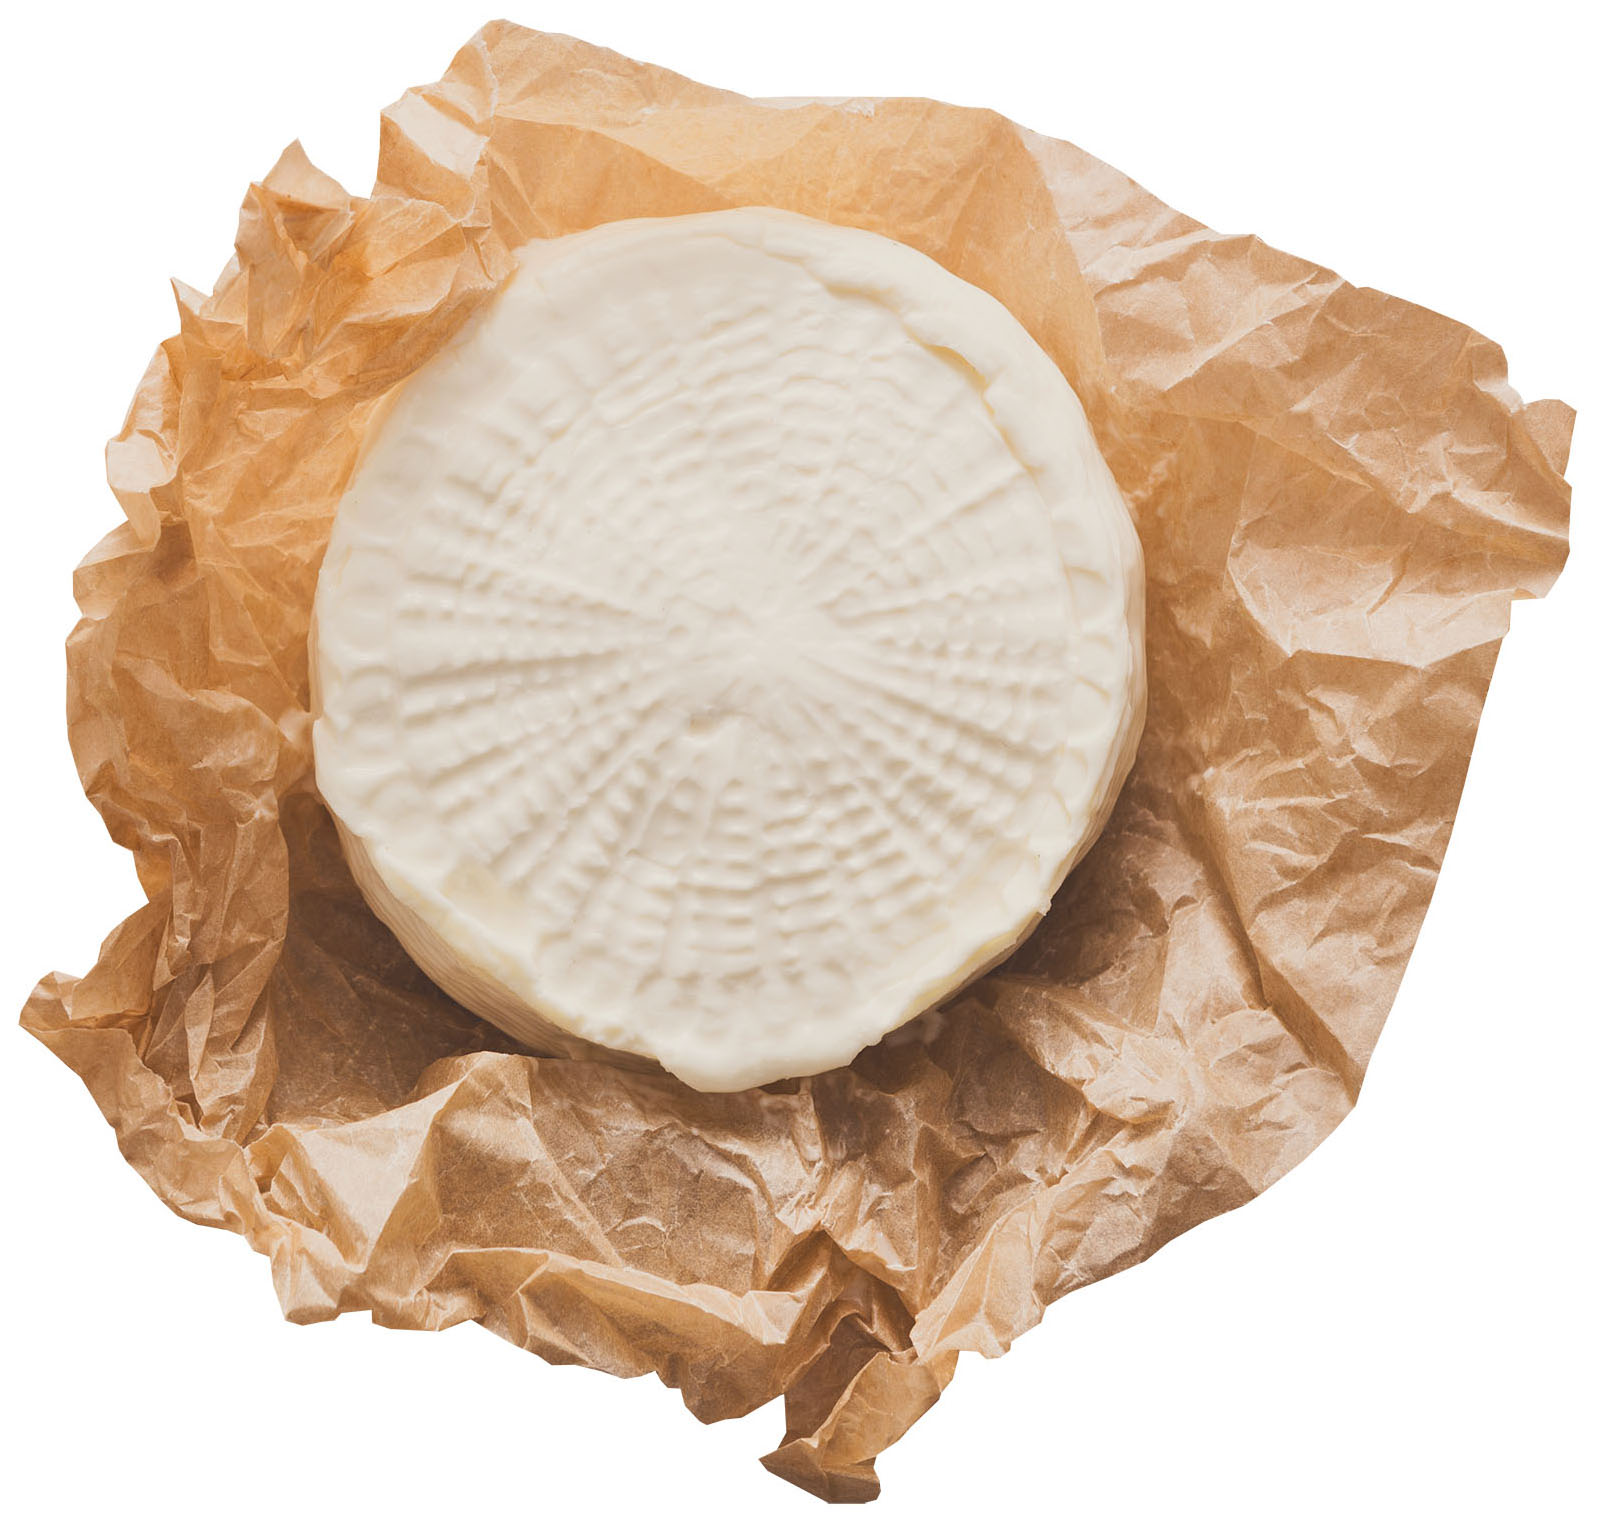 A circle of goat cheese wrapped in brown paper